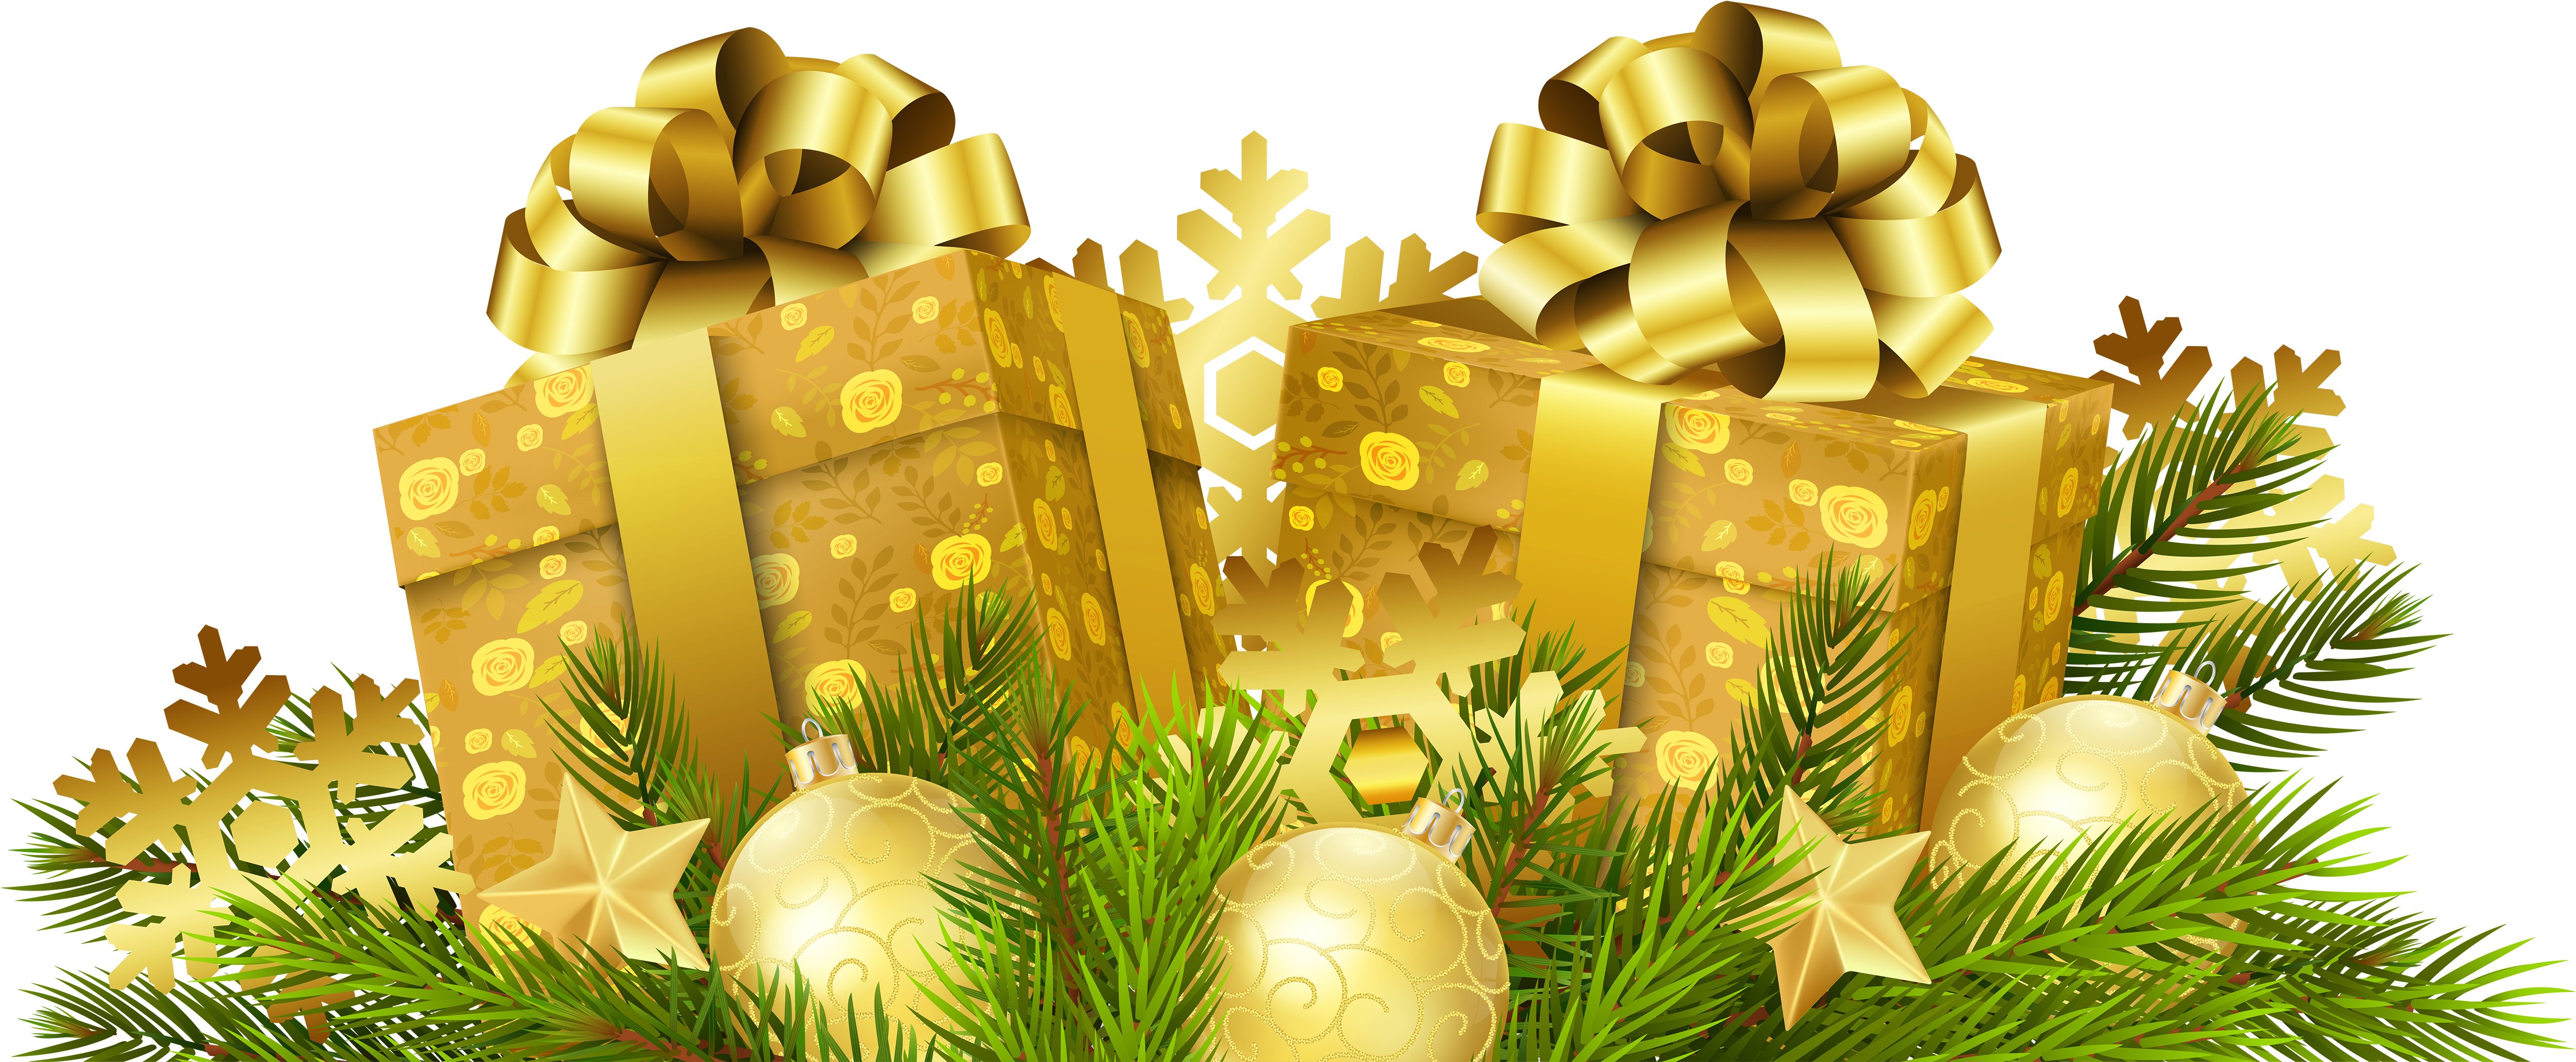 Christmas Presents Transparent Background Gold Christmas Gift Png